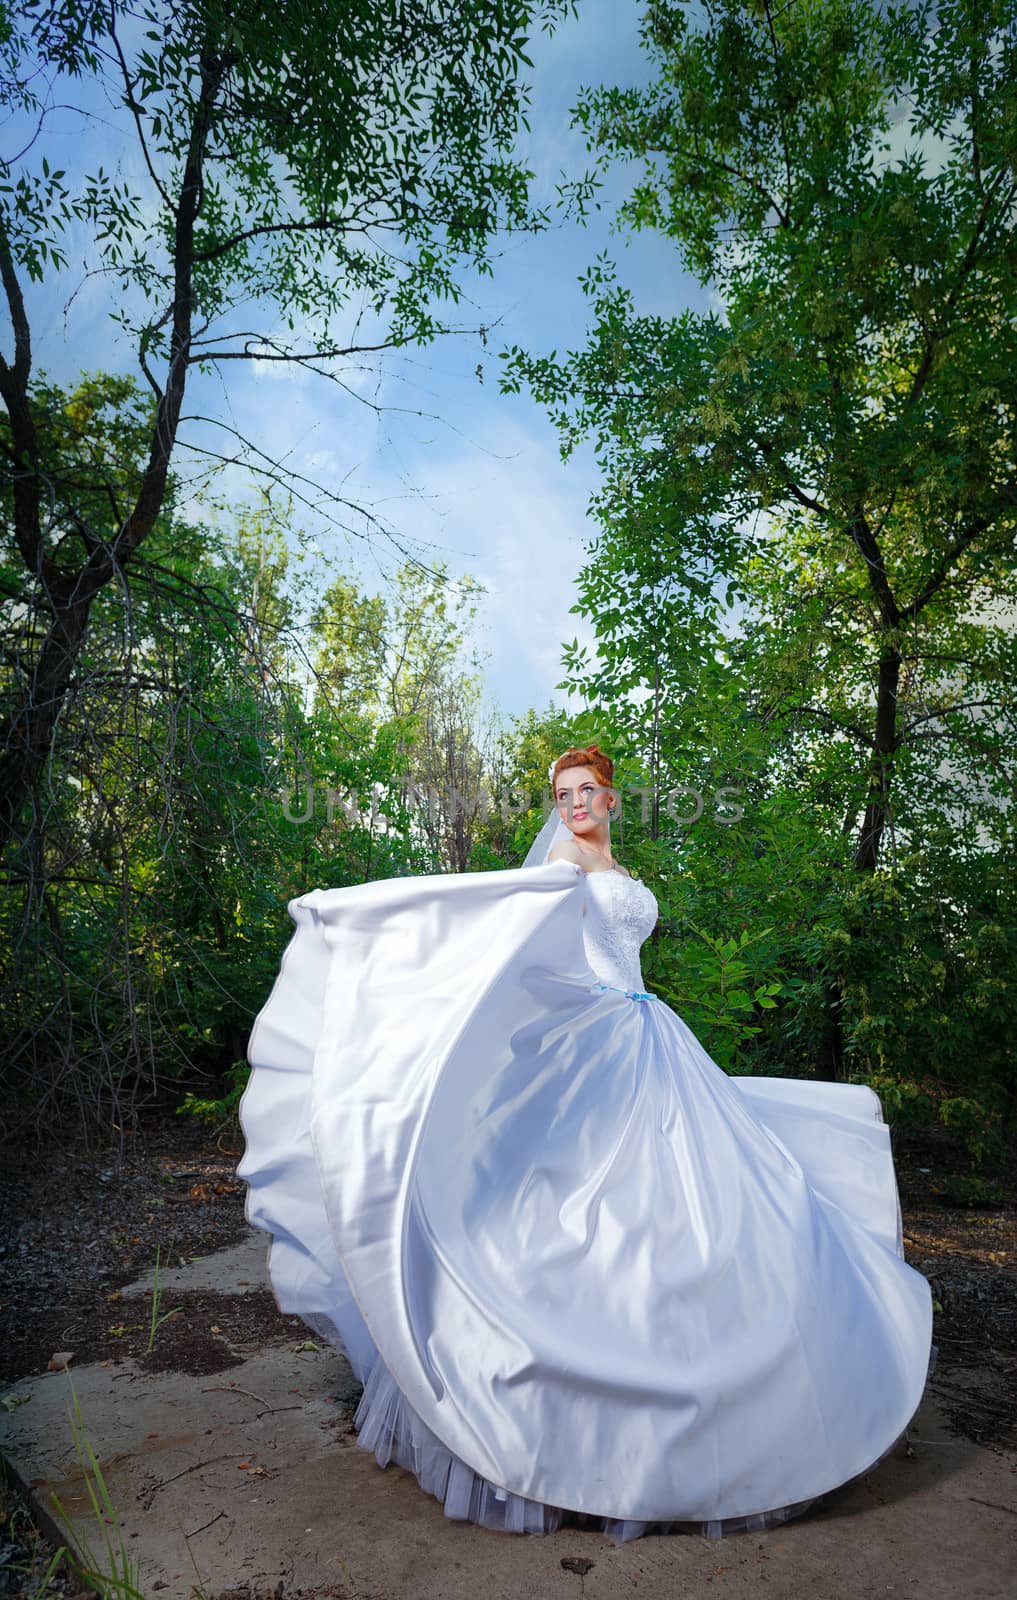 Dancing Bride in a City Park on a background of trees